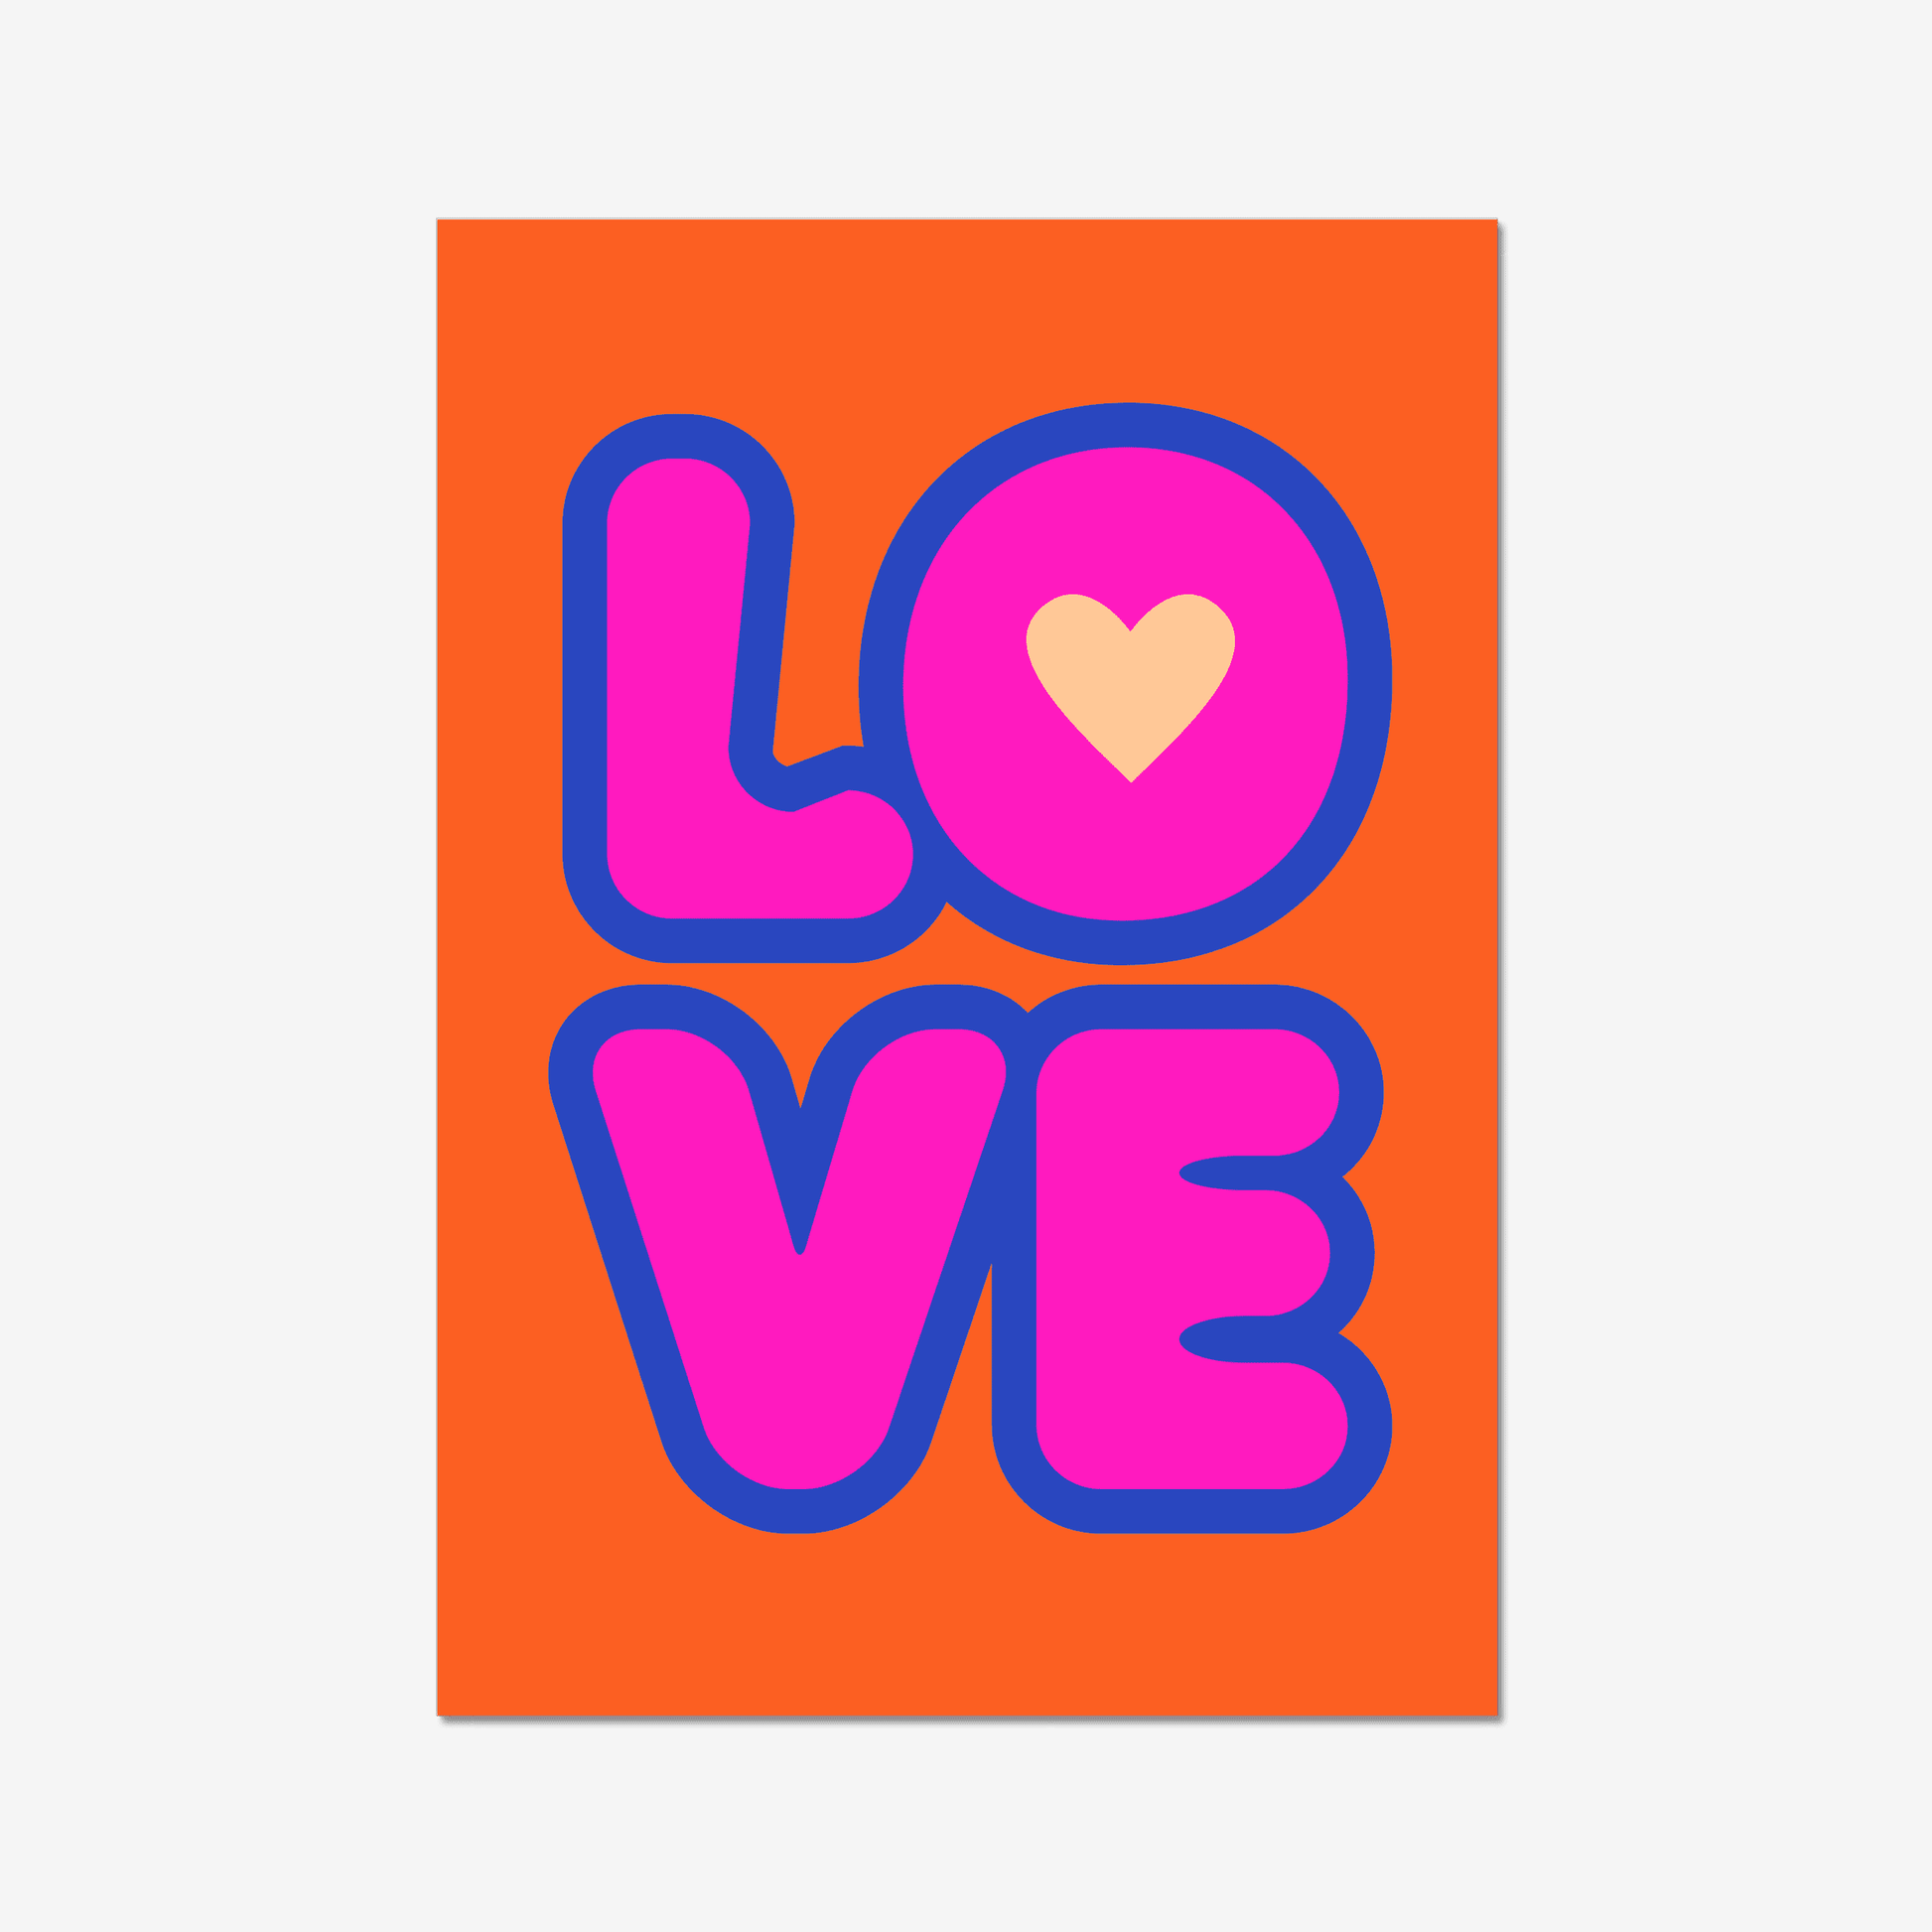 We LOVE this bright and bold typography print. A statement mix of orange, pink and blue. This quirky and colourful design is sure to make an impact, and will definitely get your visitors asking where you've been shopping... make sure you tell them, Cuddles In The Kitchen!